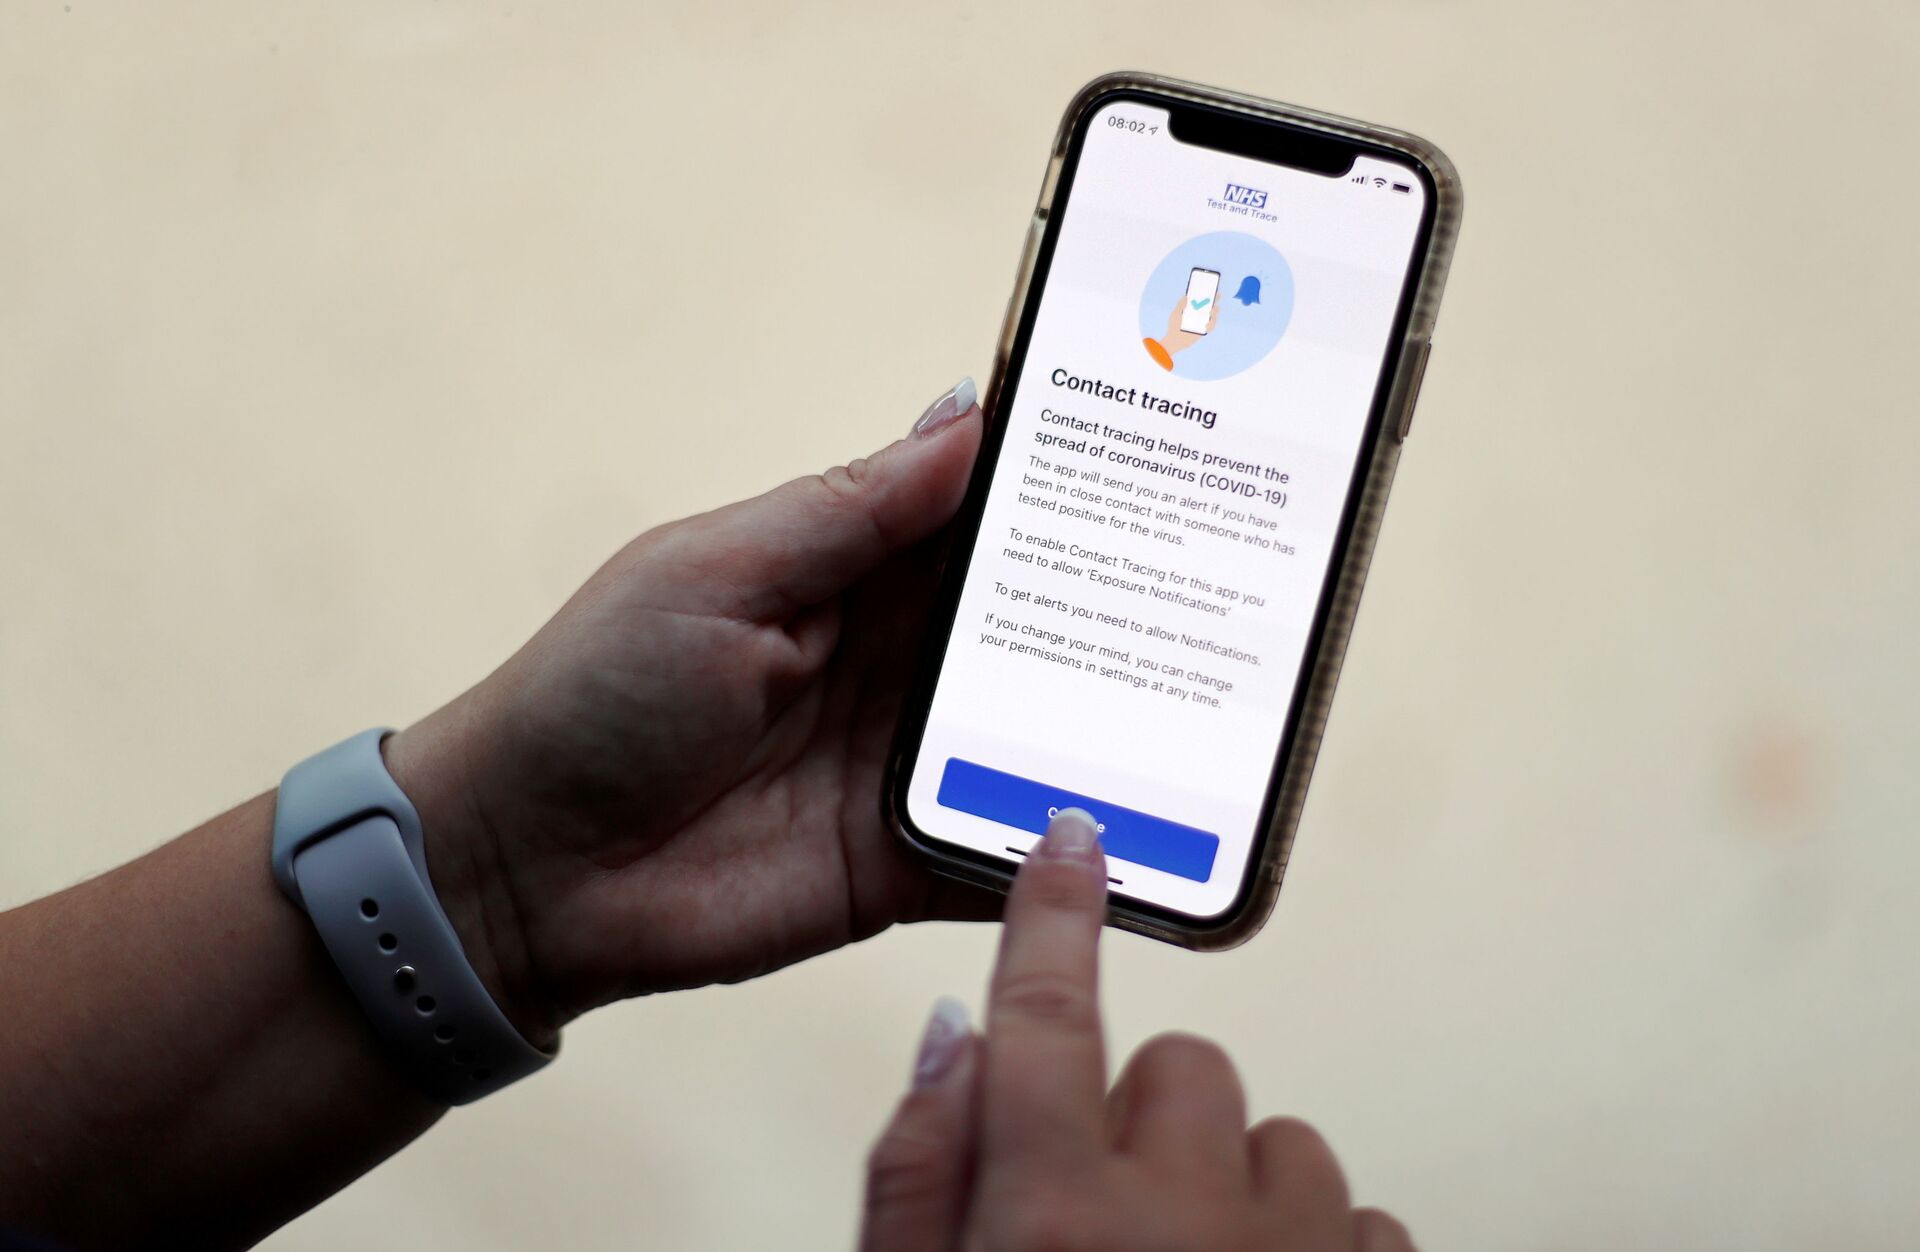 FILE PHOTO: The coronavirus disease (COVID-19) contact tracing smartphone app of Britain's National Health Service (NHS) is displayed on an iPhone in this illustration photograph taken in Keele, Britain, September 24, 2020.  - Sputnik International, 1920, 07.09.2021